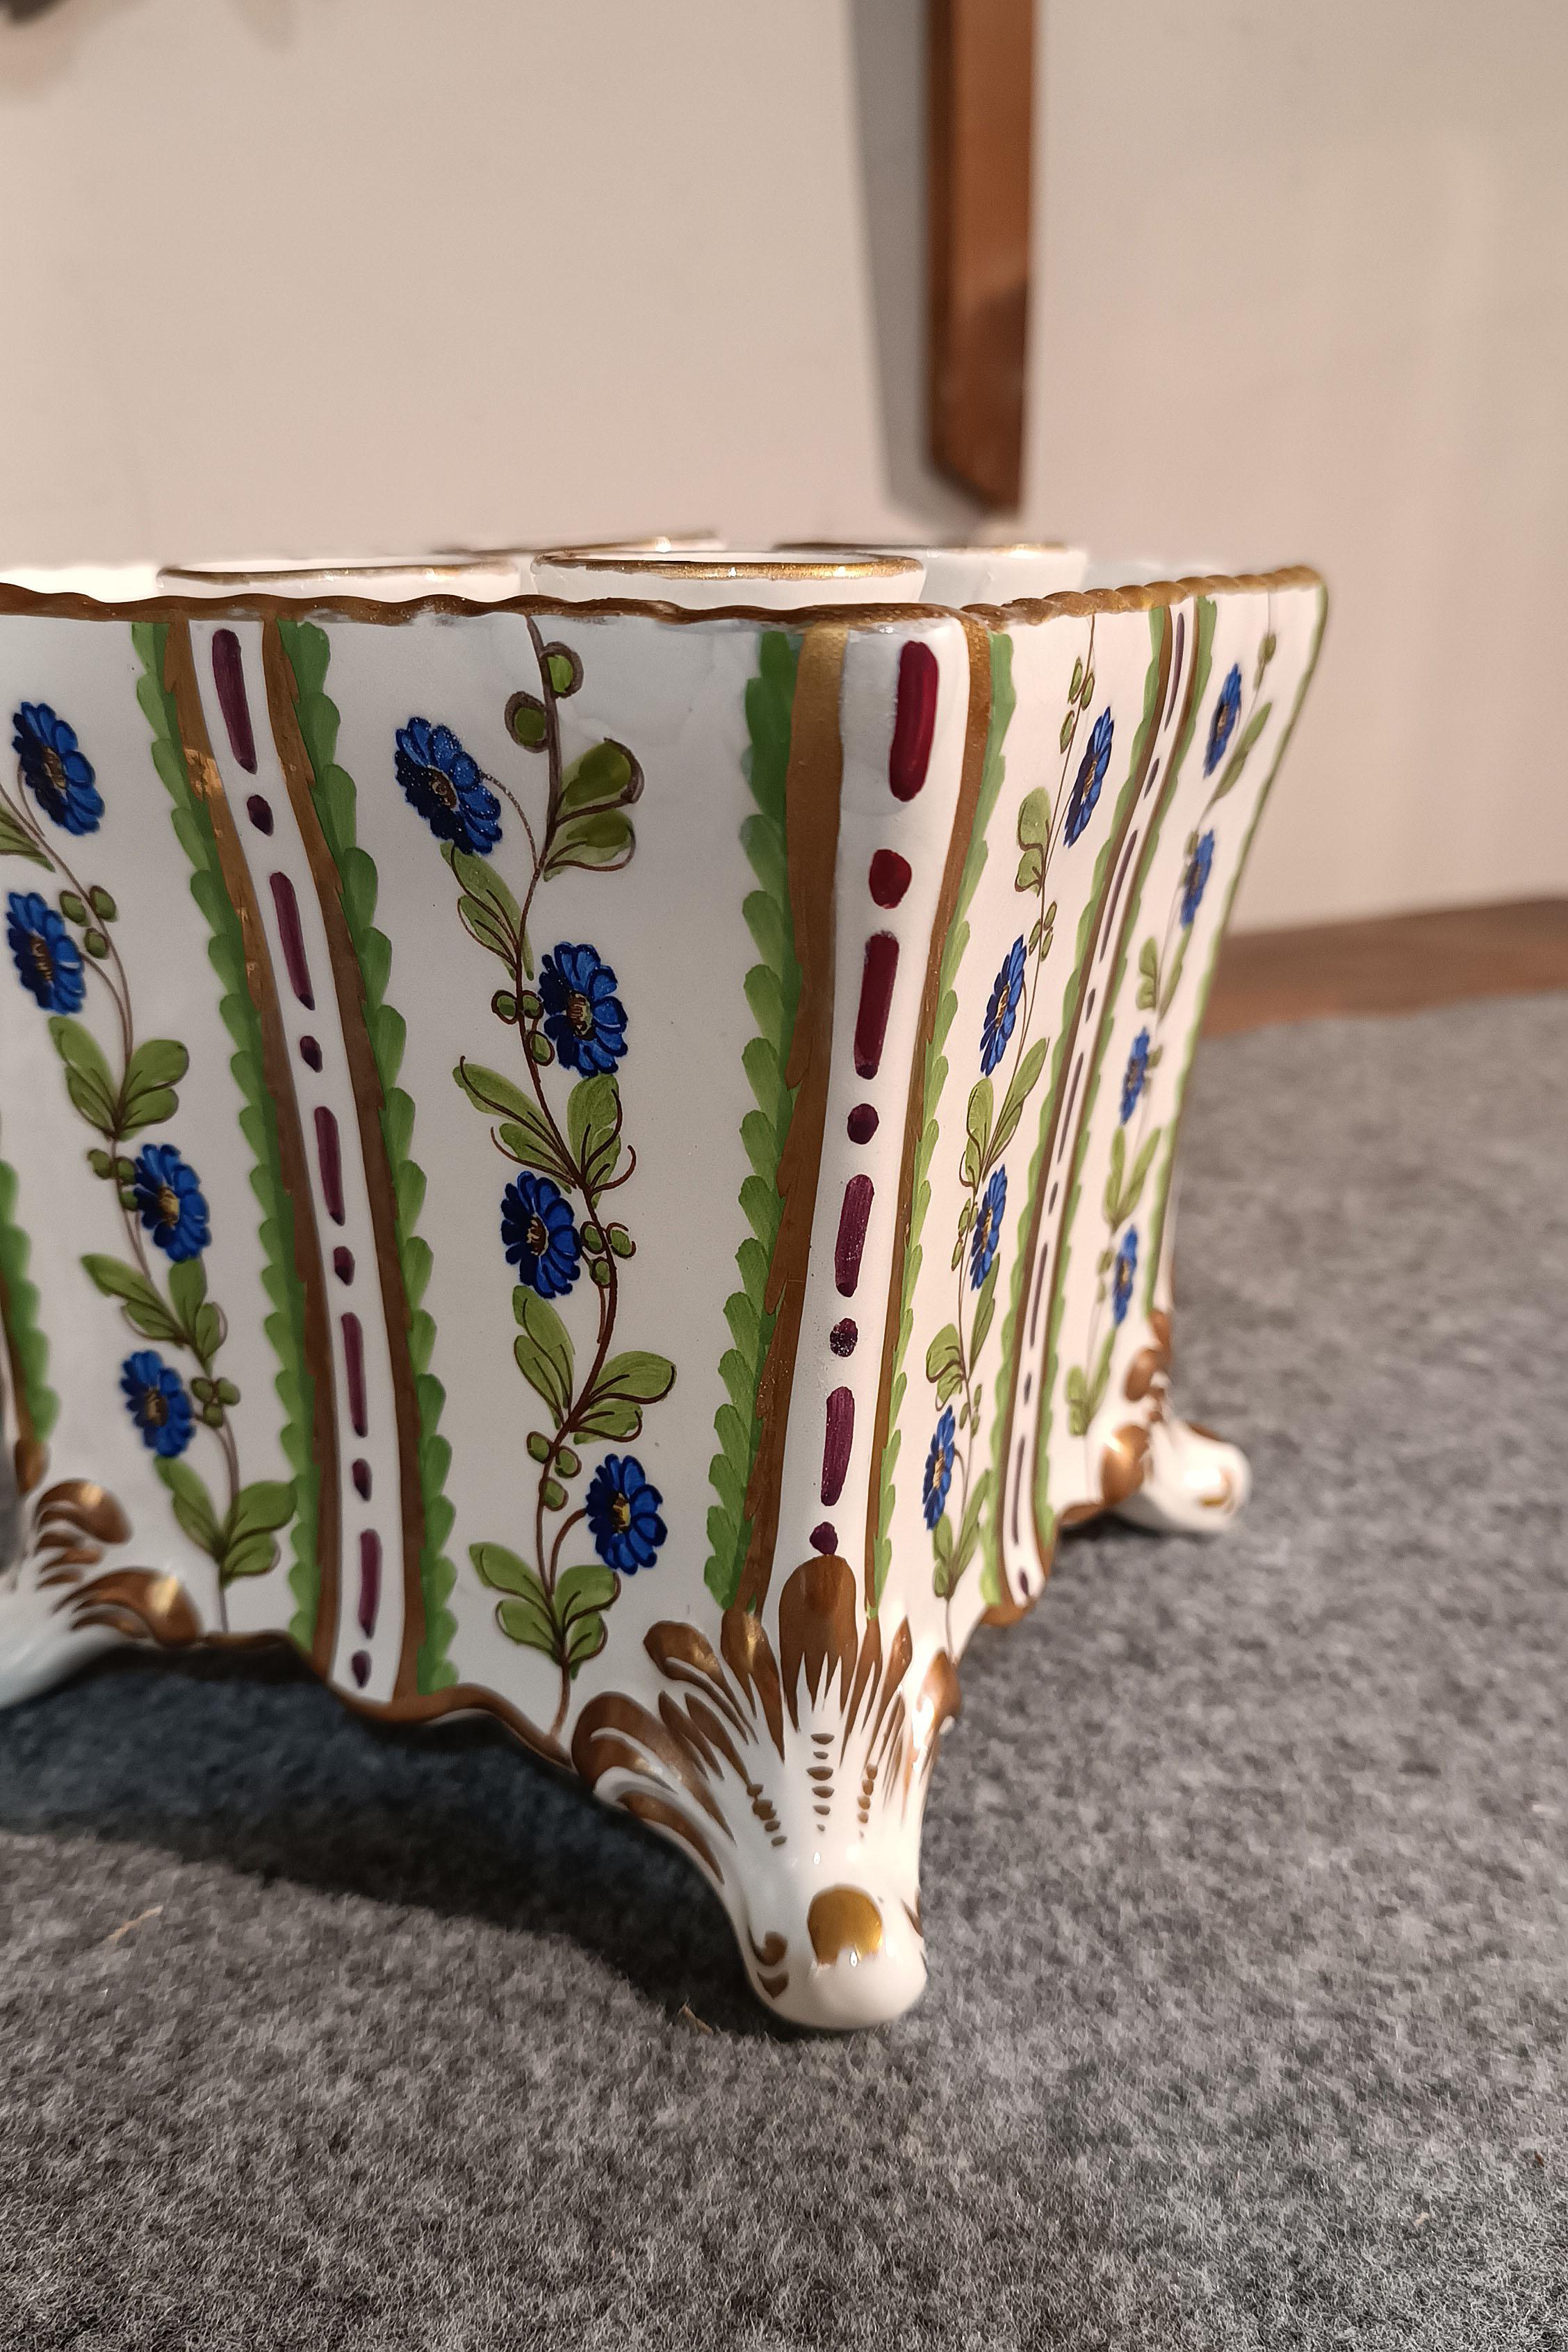 19th Century PAIR OF EARLY 19th CENTURY POLYCHROME PORCELAIN FLOWER VASE For Sale